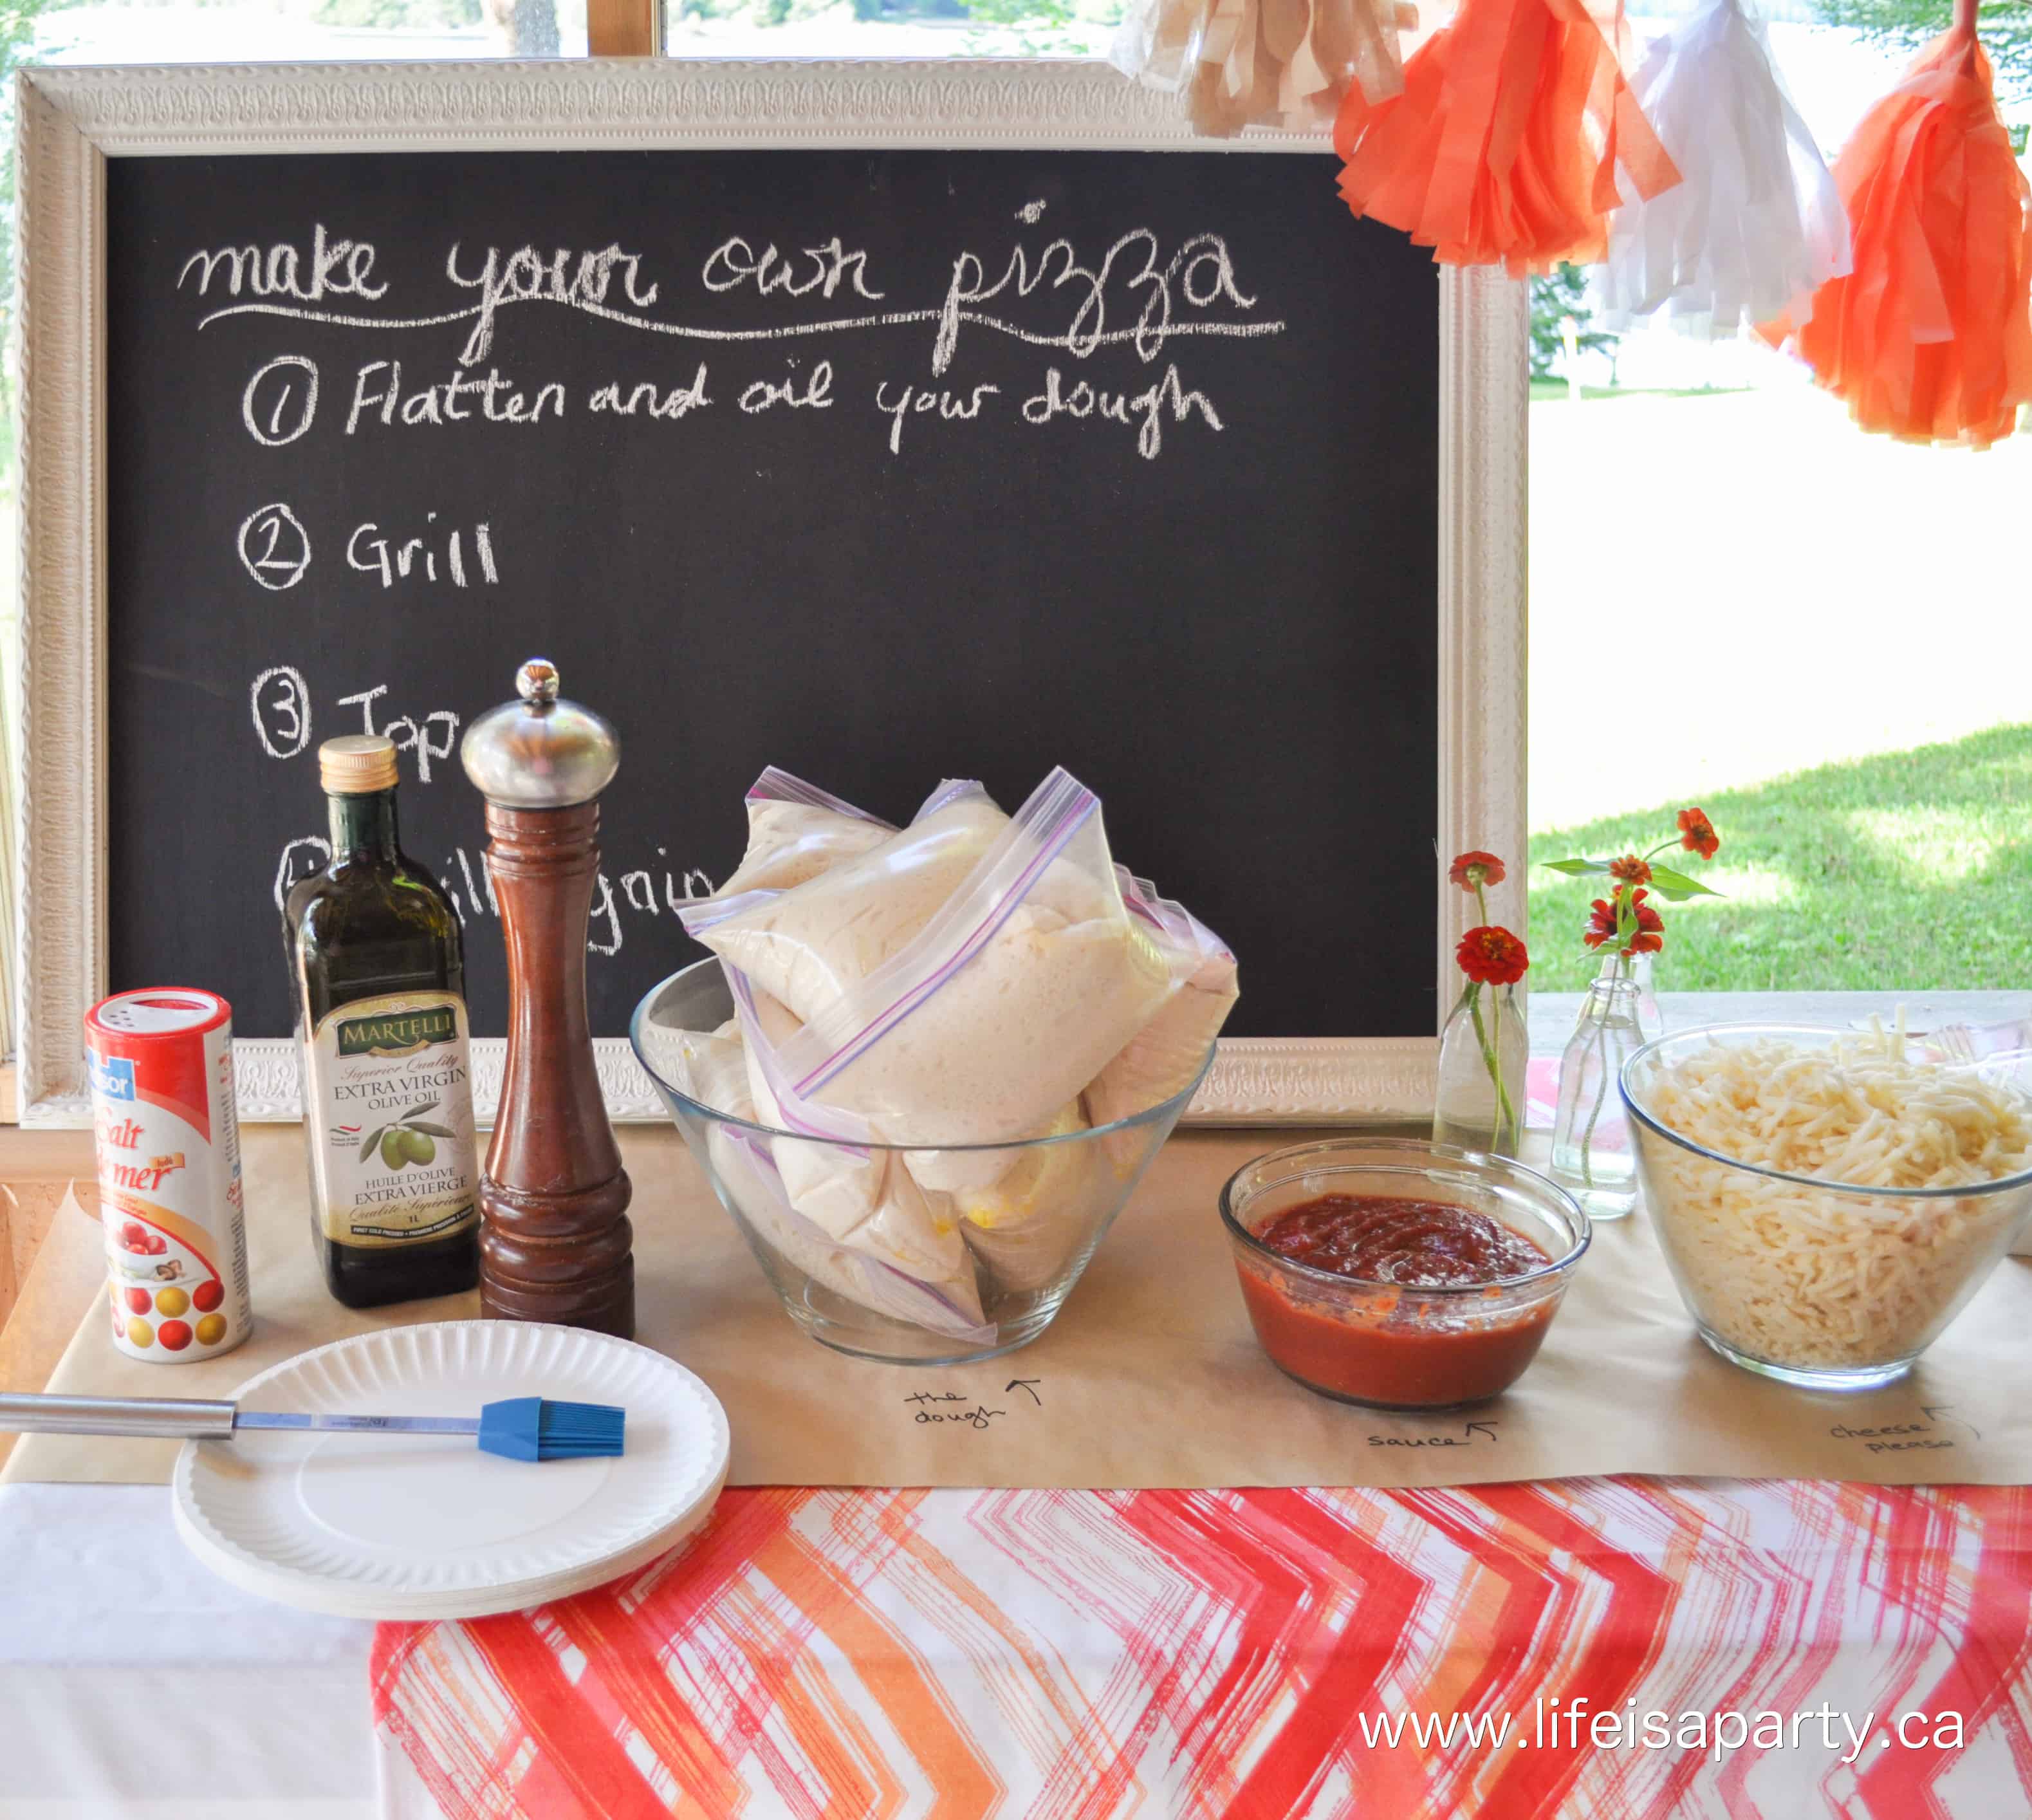 Make Your Own Pizza Party instructions on a chalkboard for guests